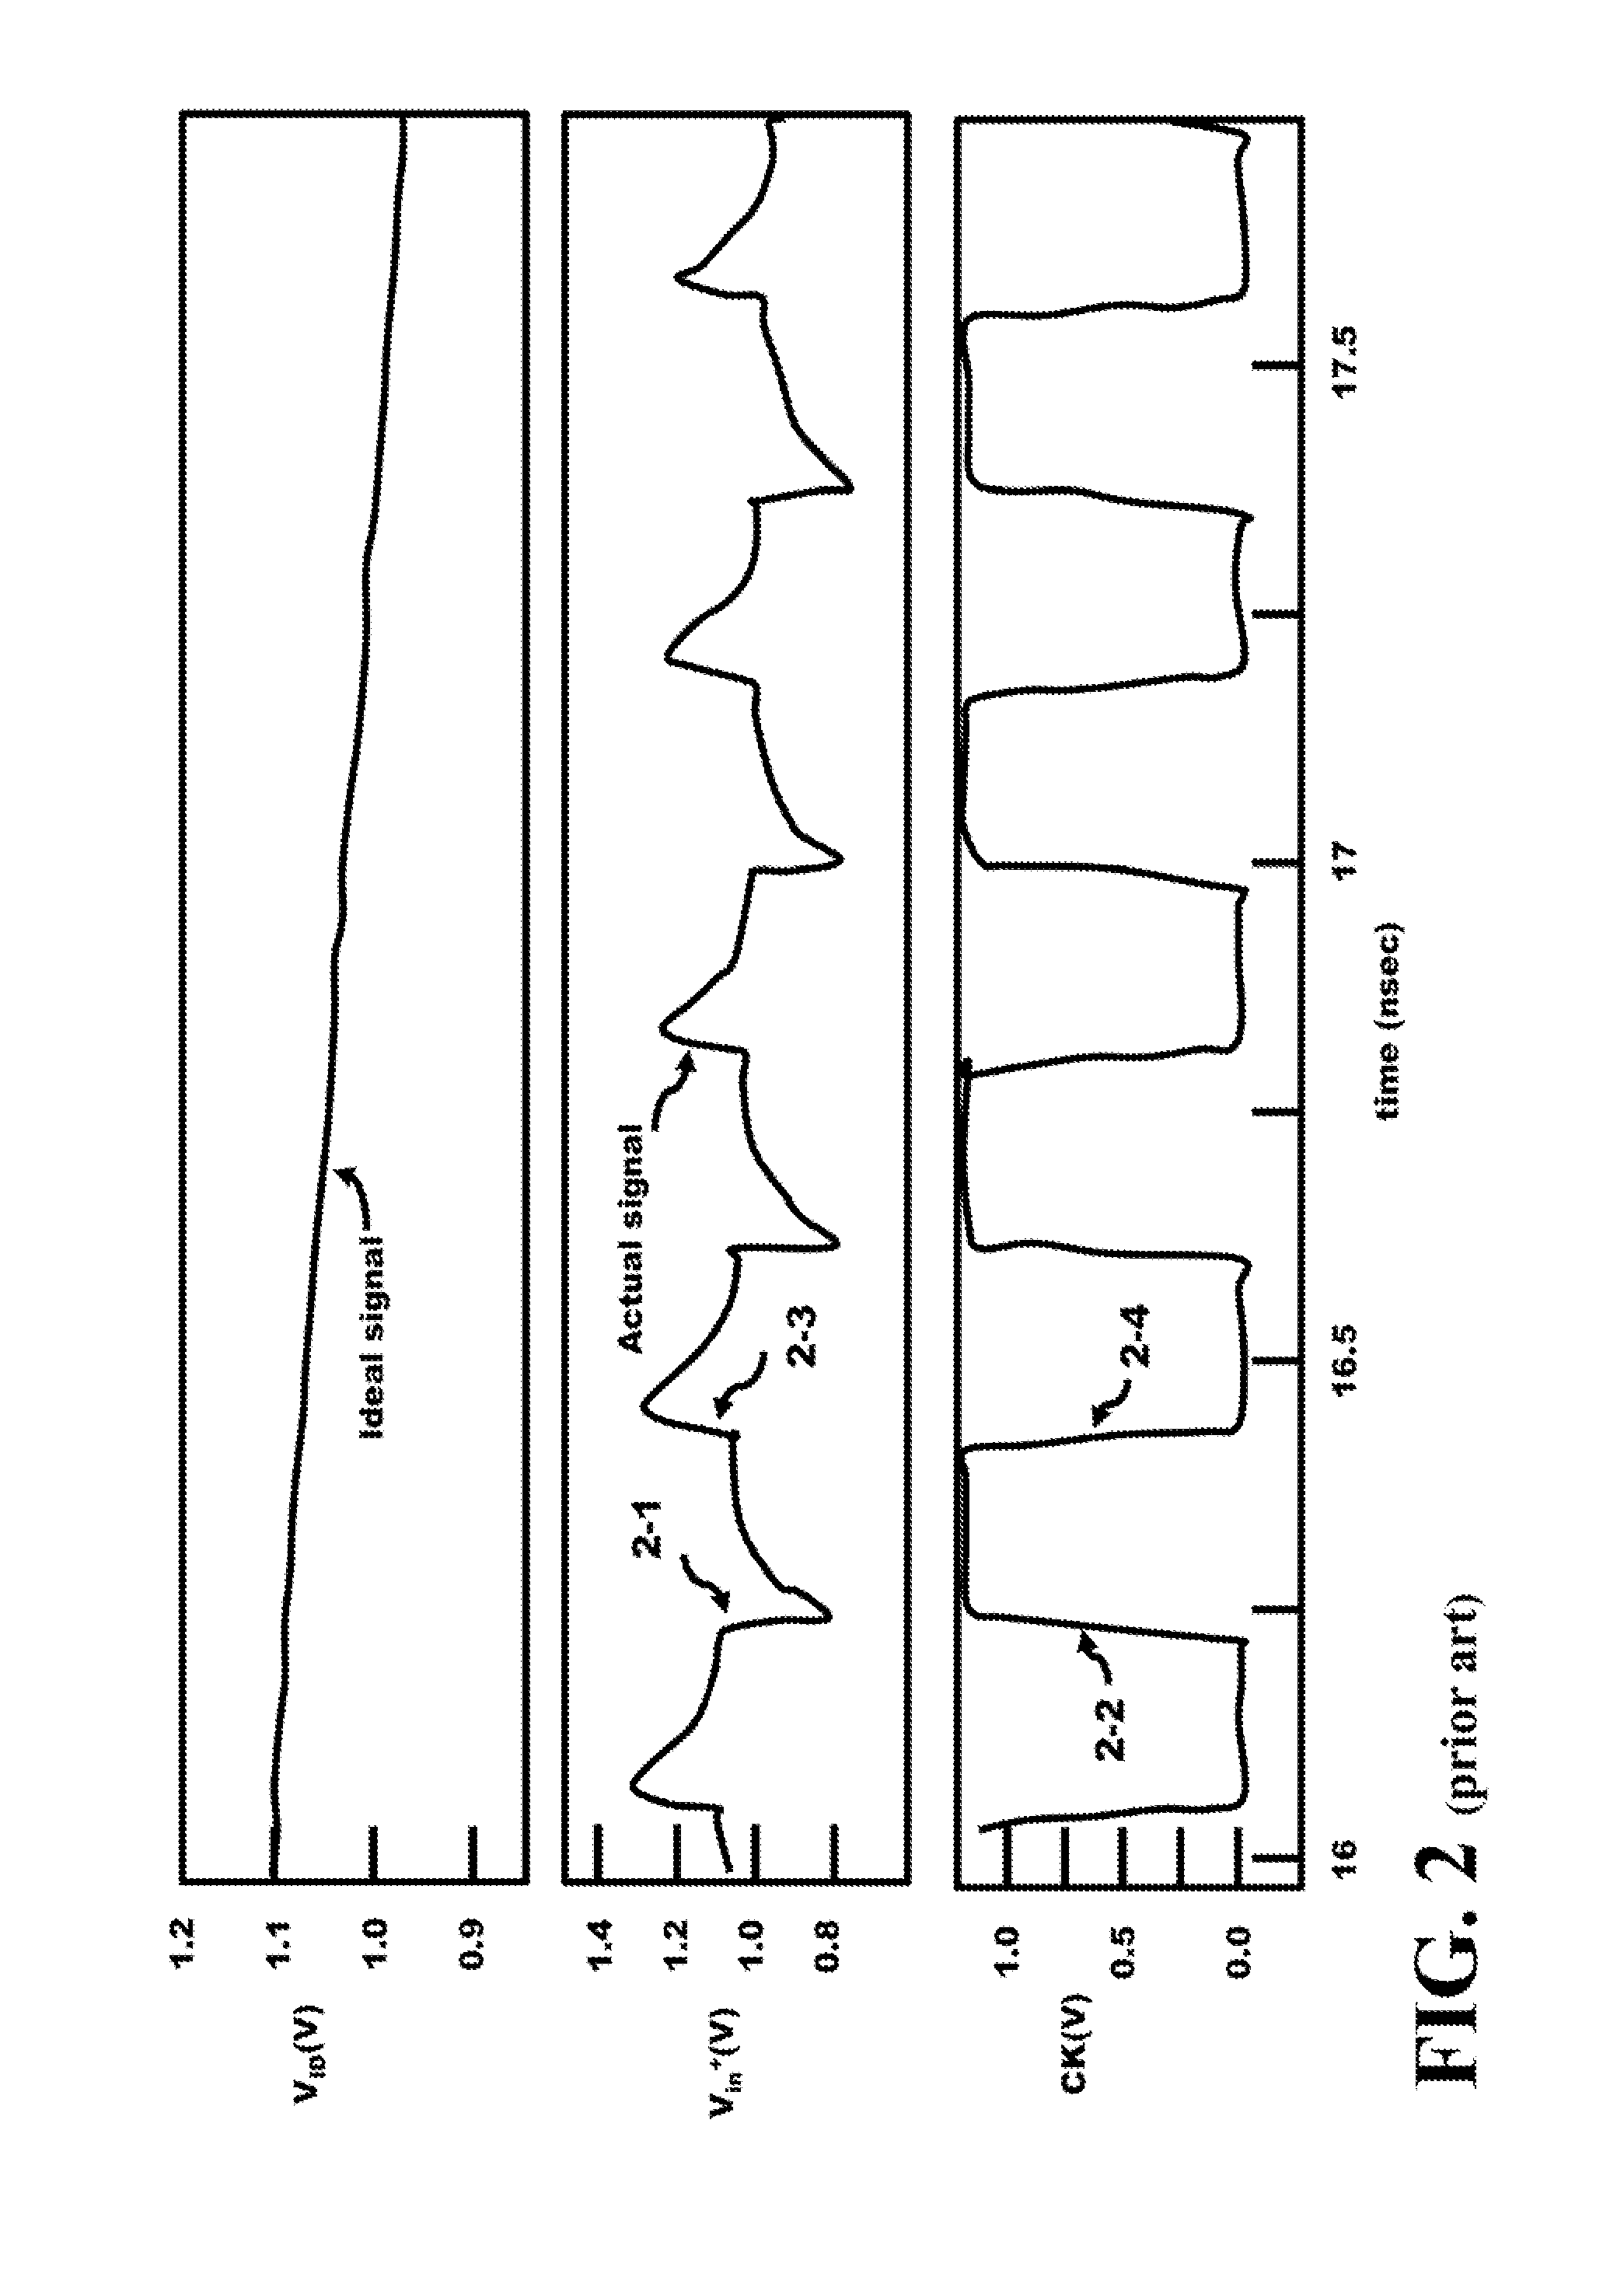 Method and apparatus for an active negative-capacitor circuit to cancel the input capacitance of comparators